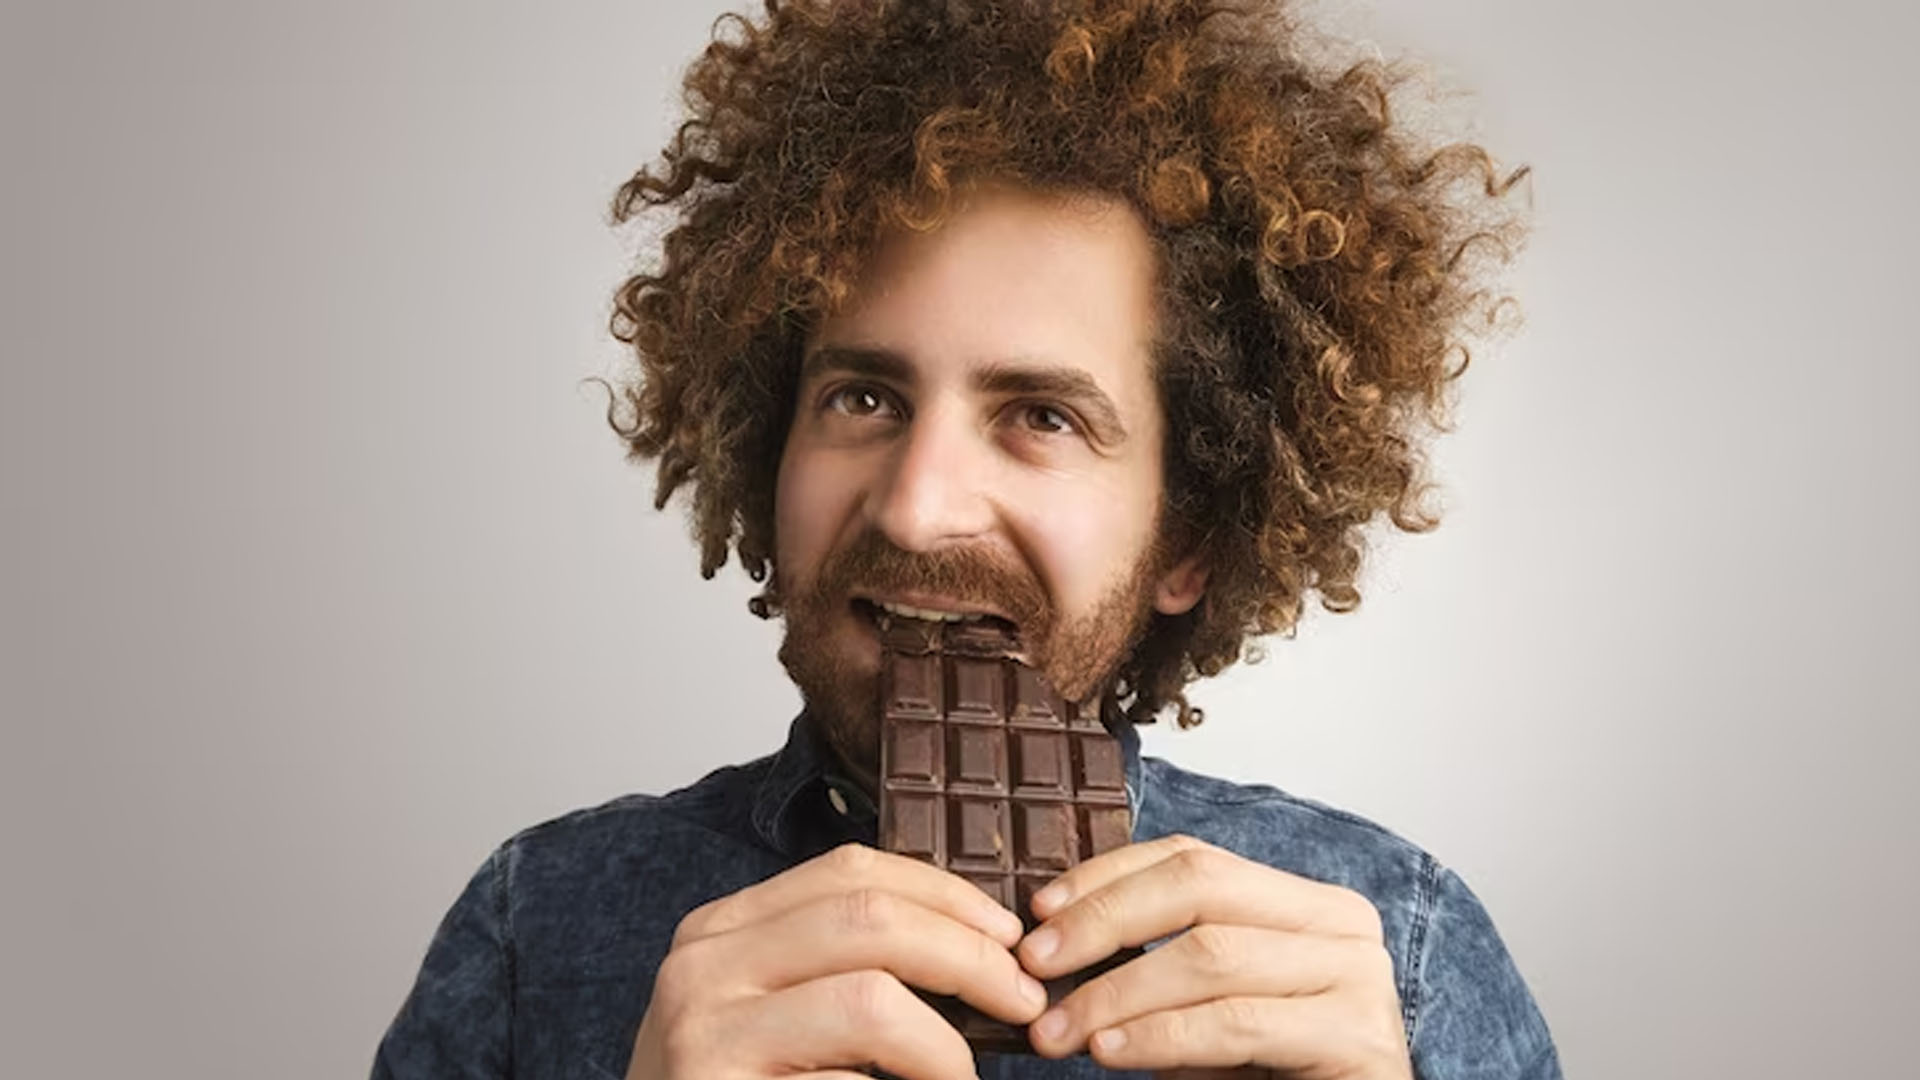 What Are The Health Benefits of Eating Chocolate Every Day?